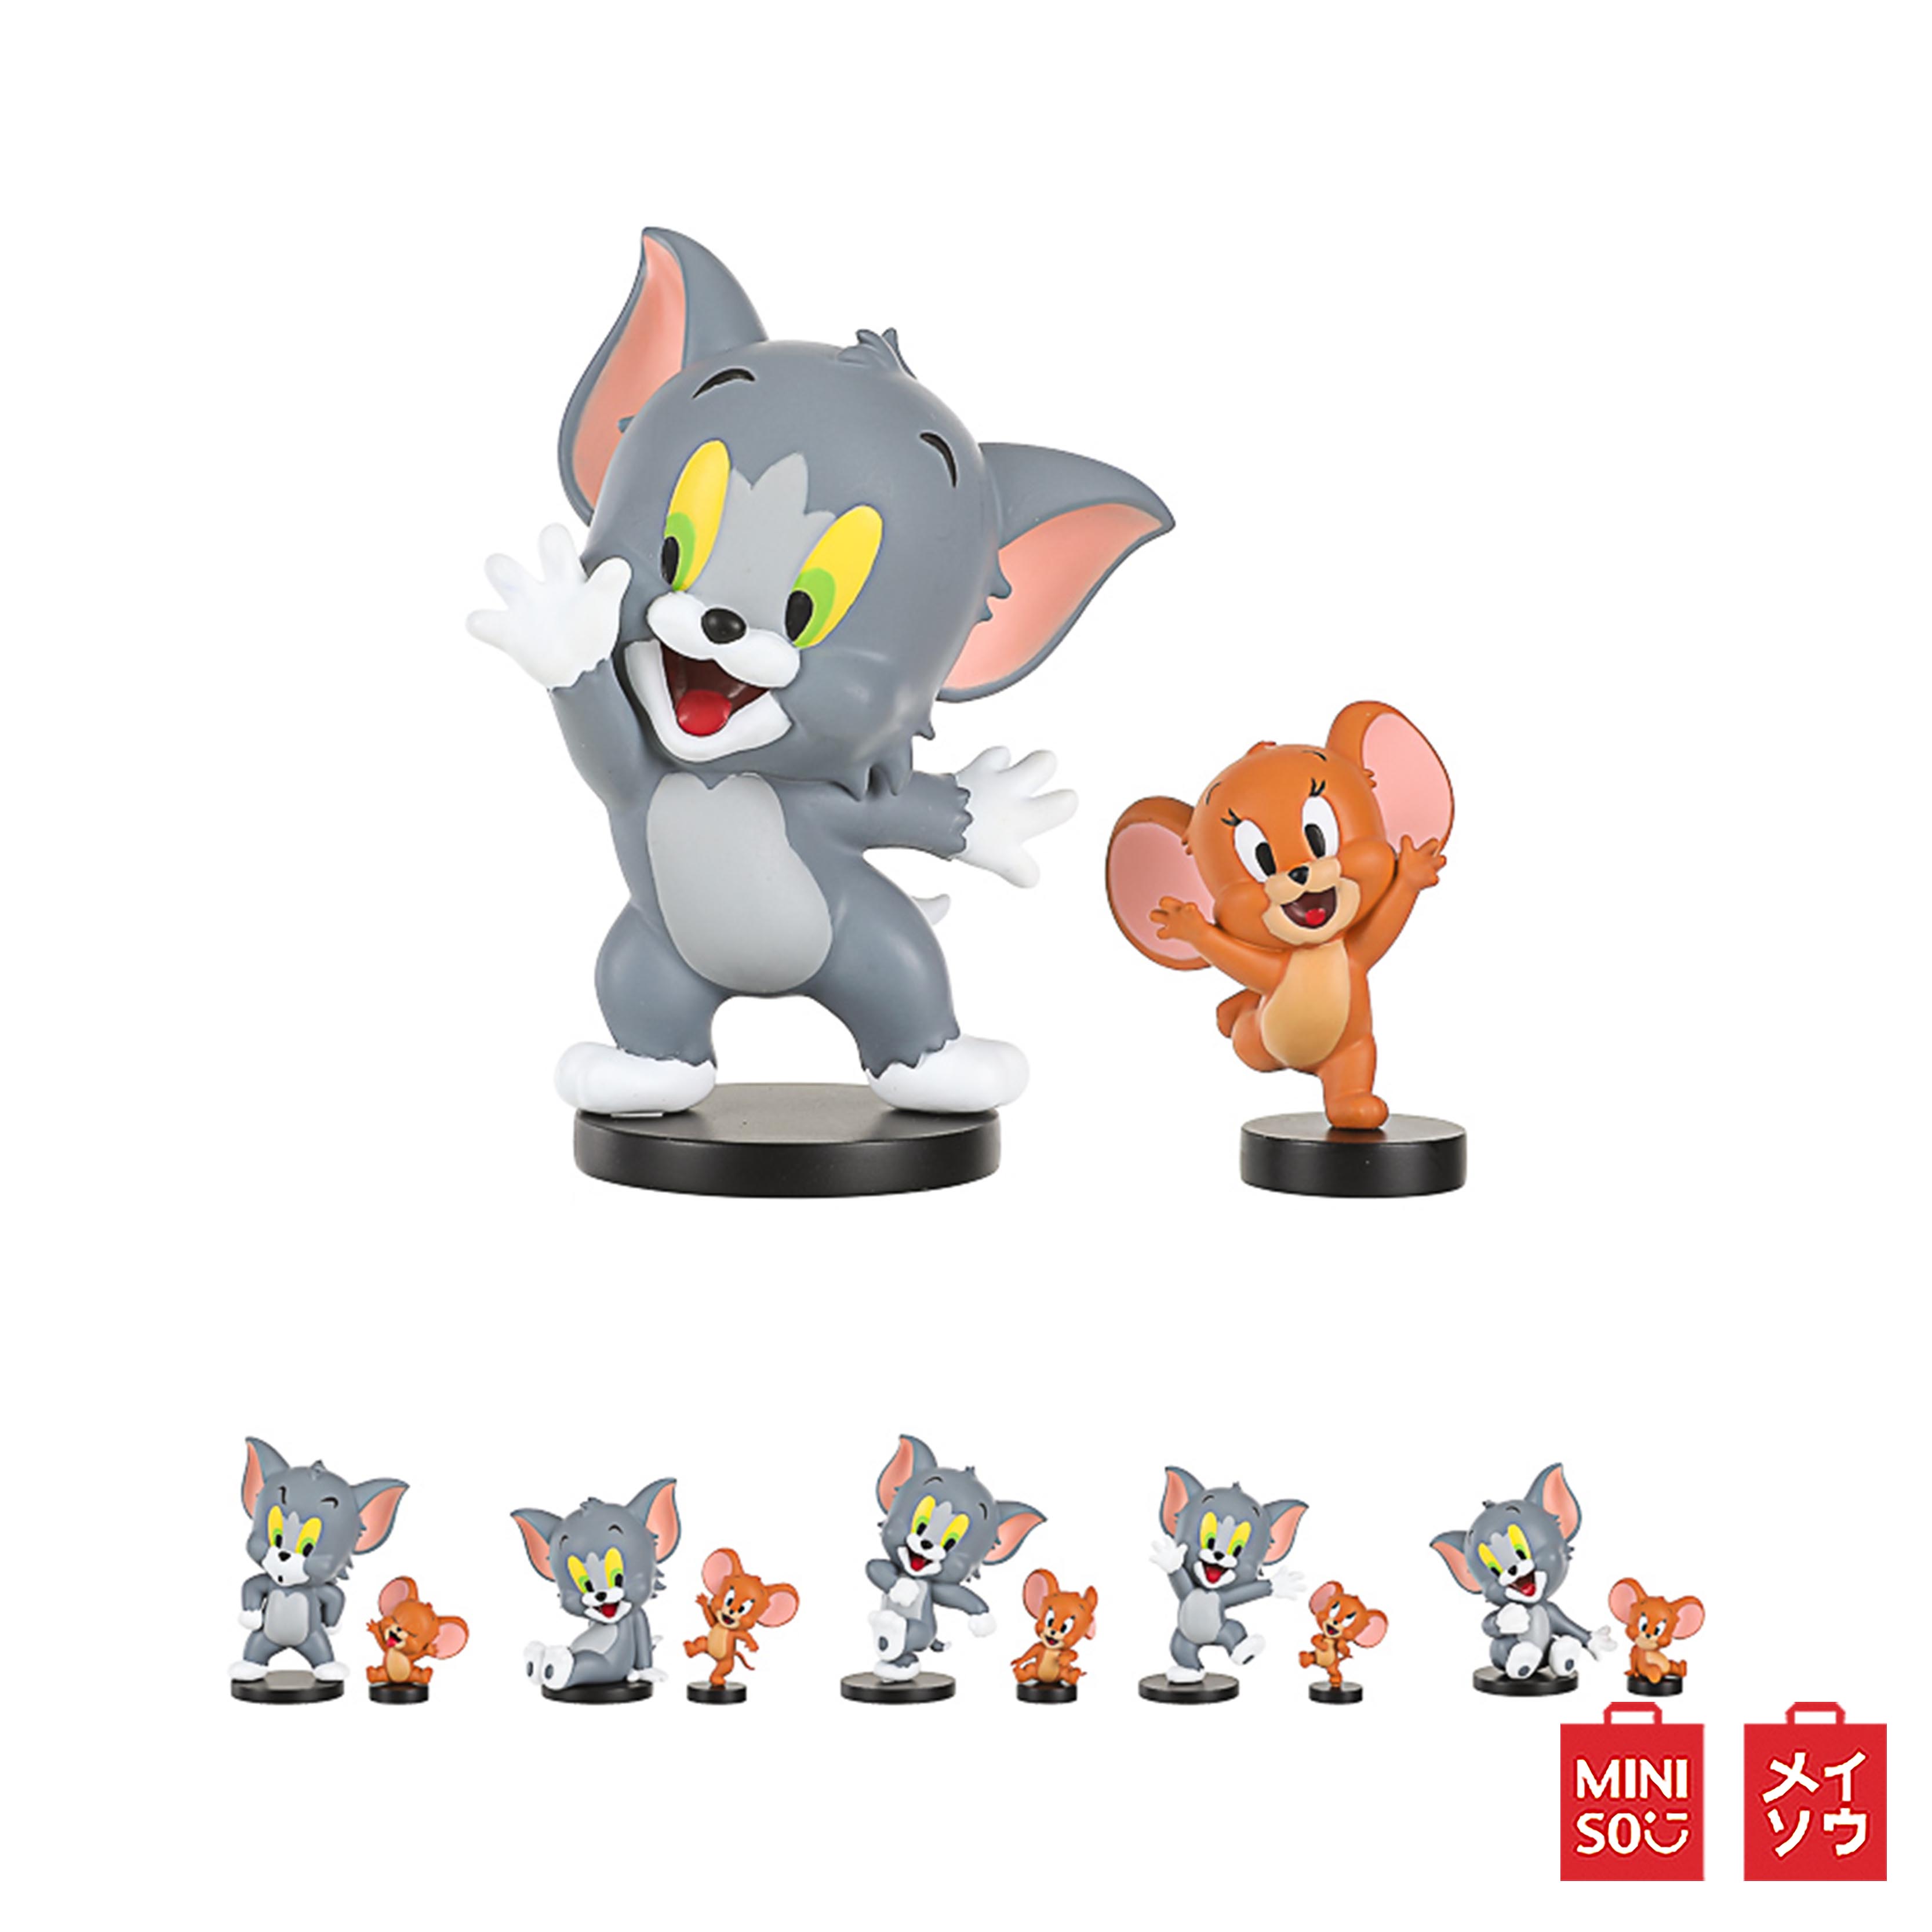 MINISO กล่องสุ่มโมเดล Tom&Jerry I LOVE CHEESE Collection Figures Blind box